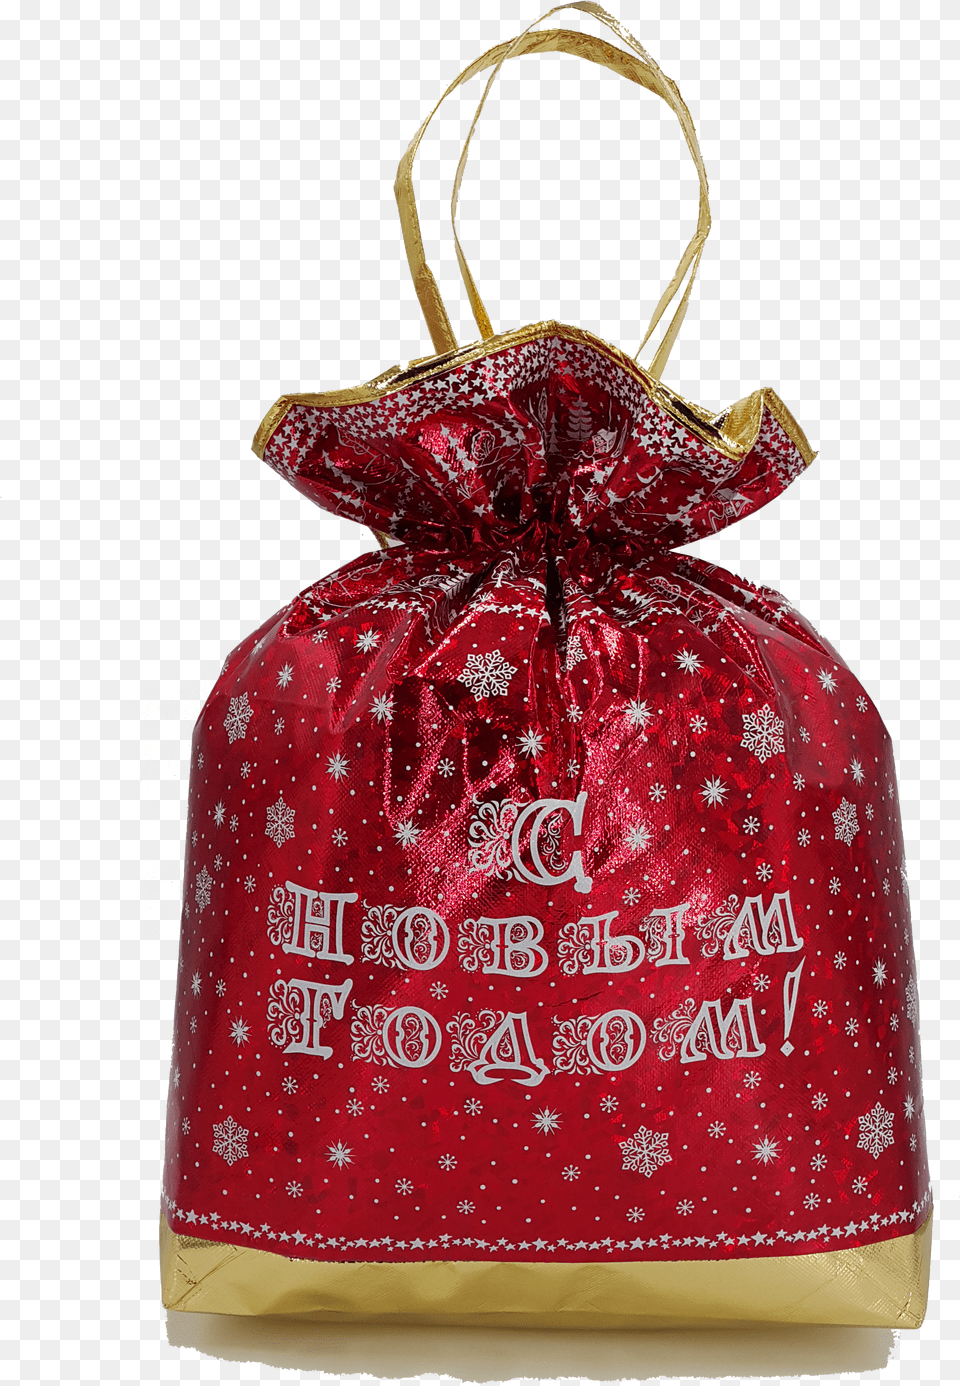 Hd M 10r Christmas Ornament Image Sparkly Free Transparent Png